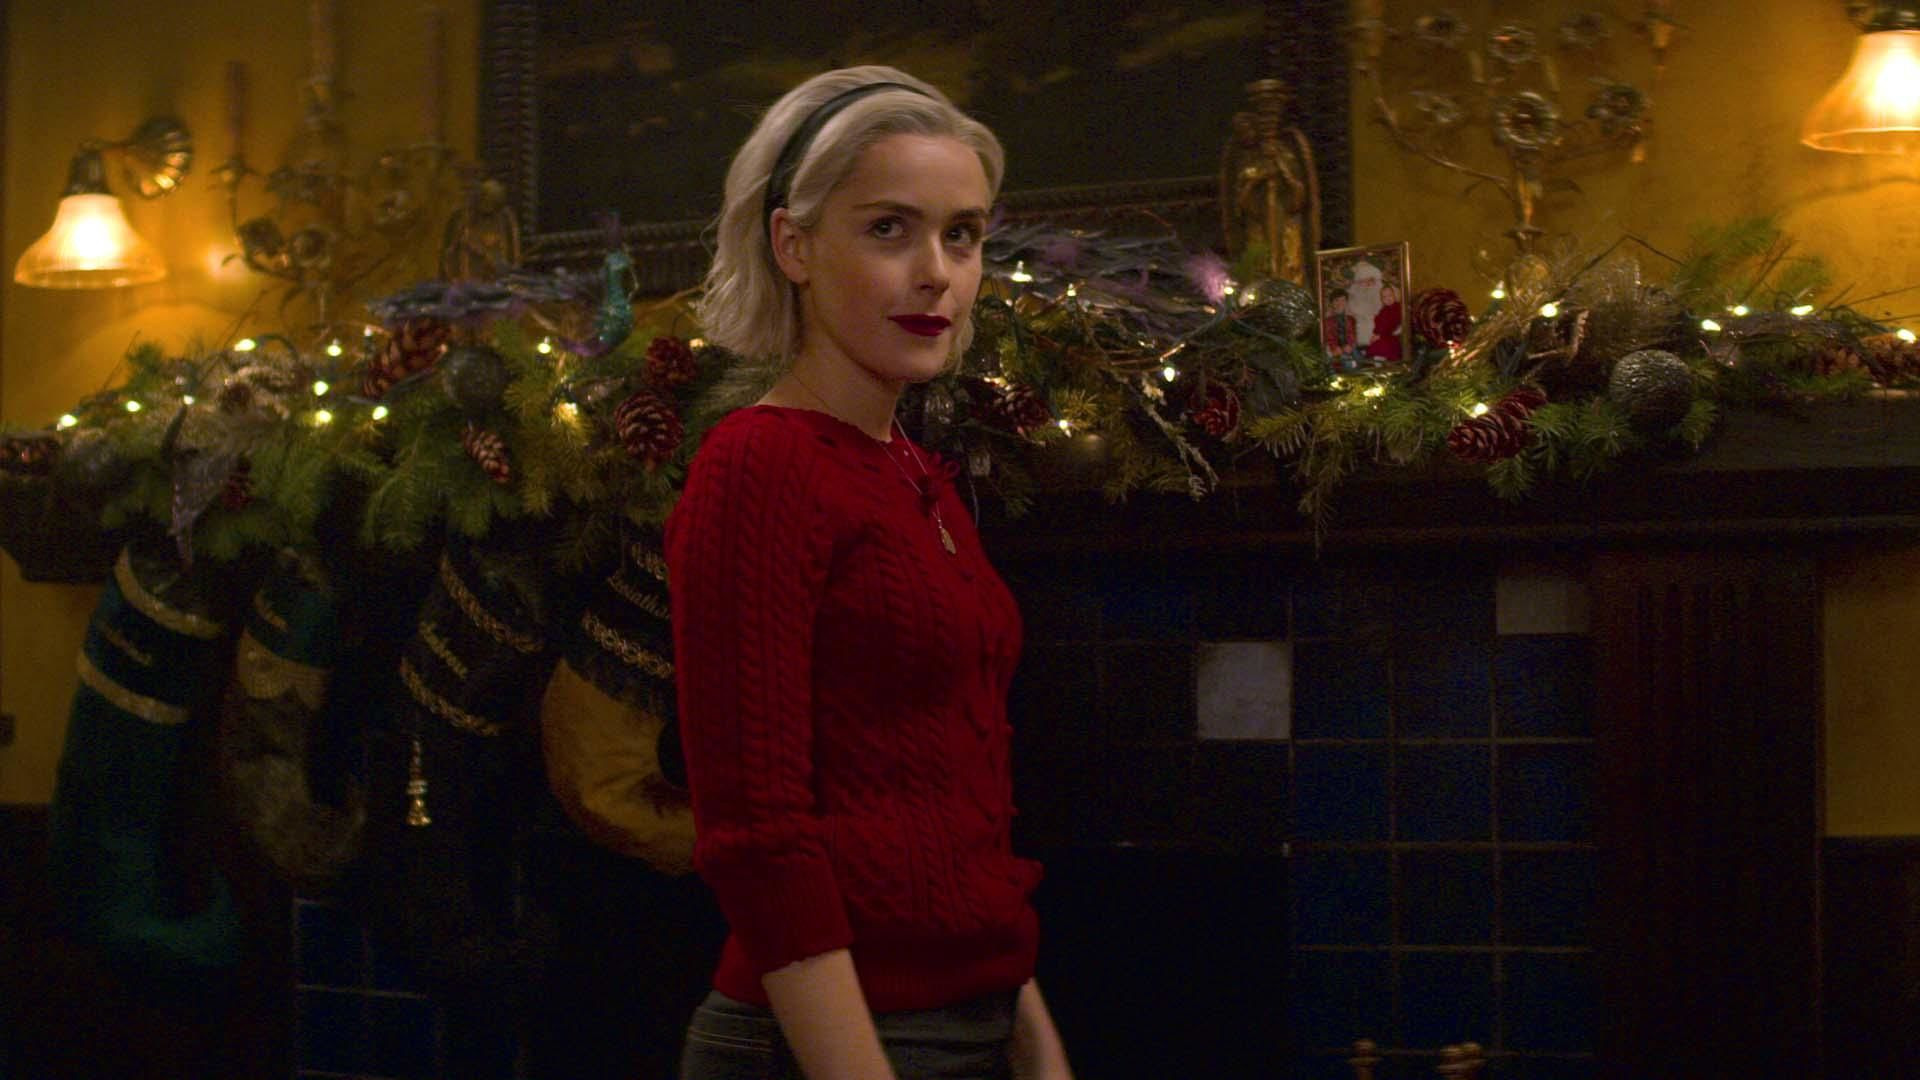 Chilling Adventures of Sabrina — s01e11 — Chapter Eleven: A Midwinter's Tale